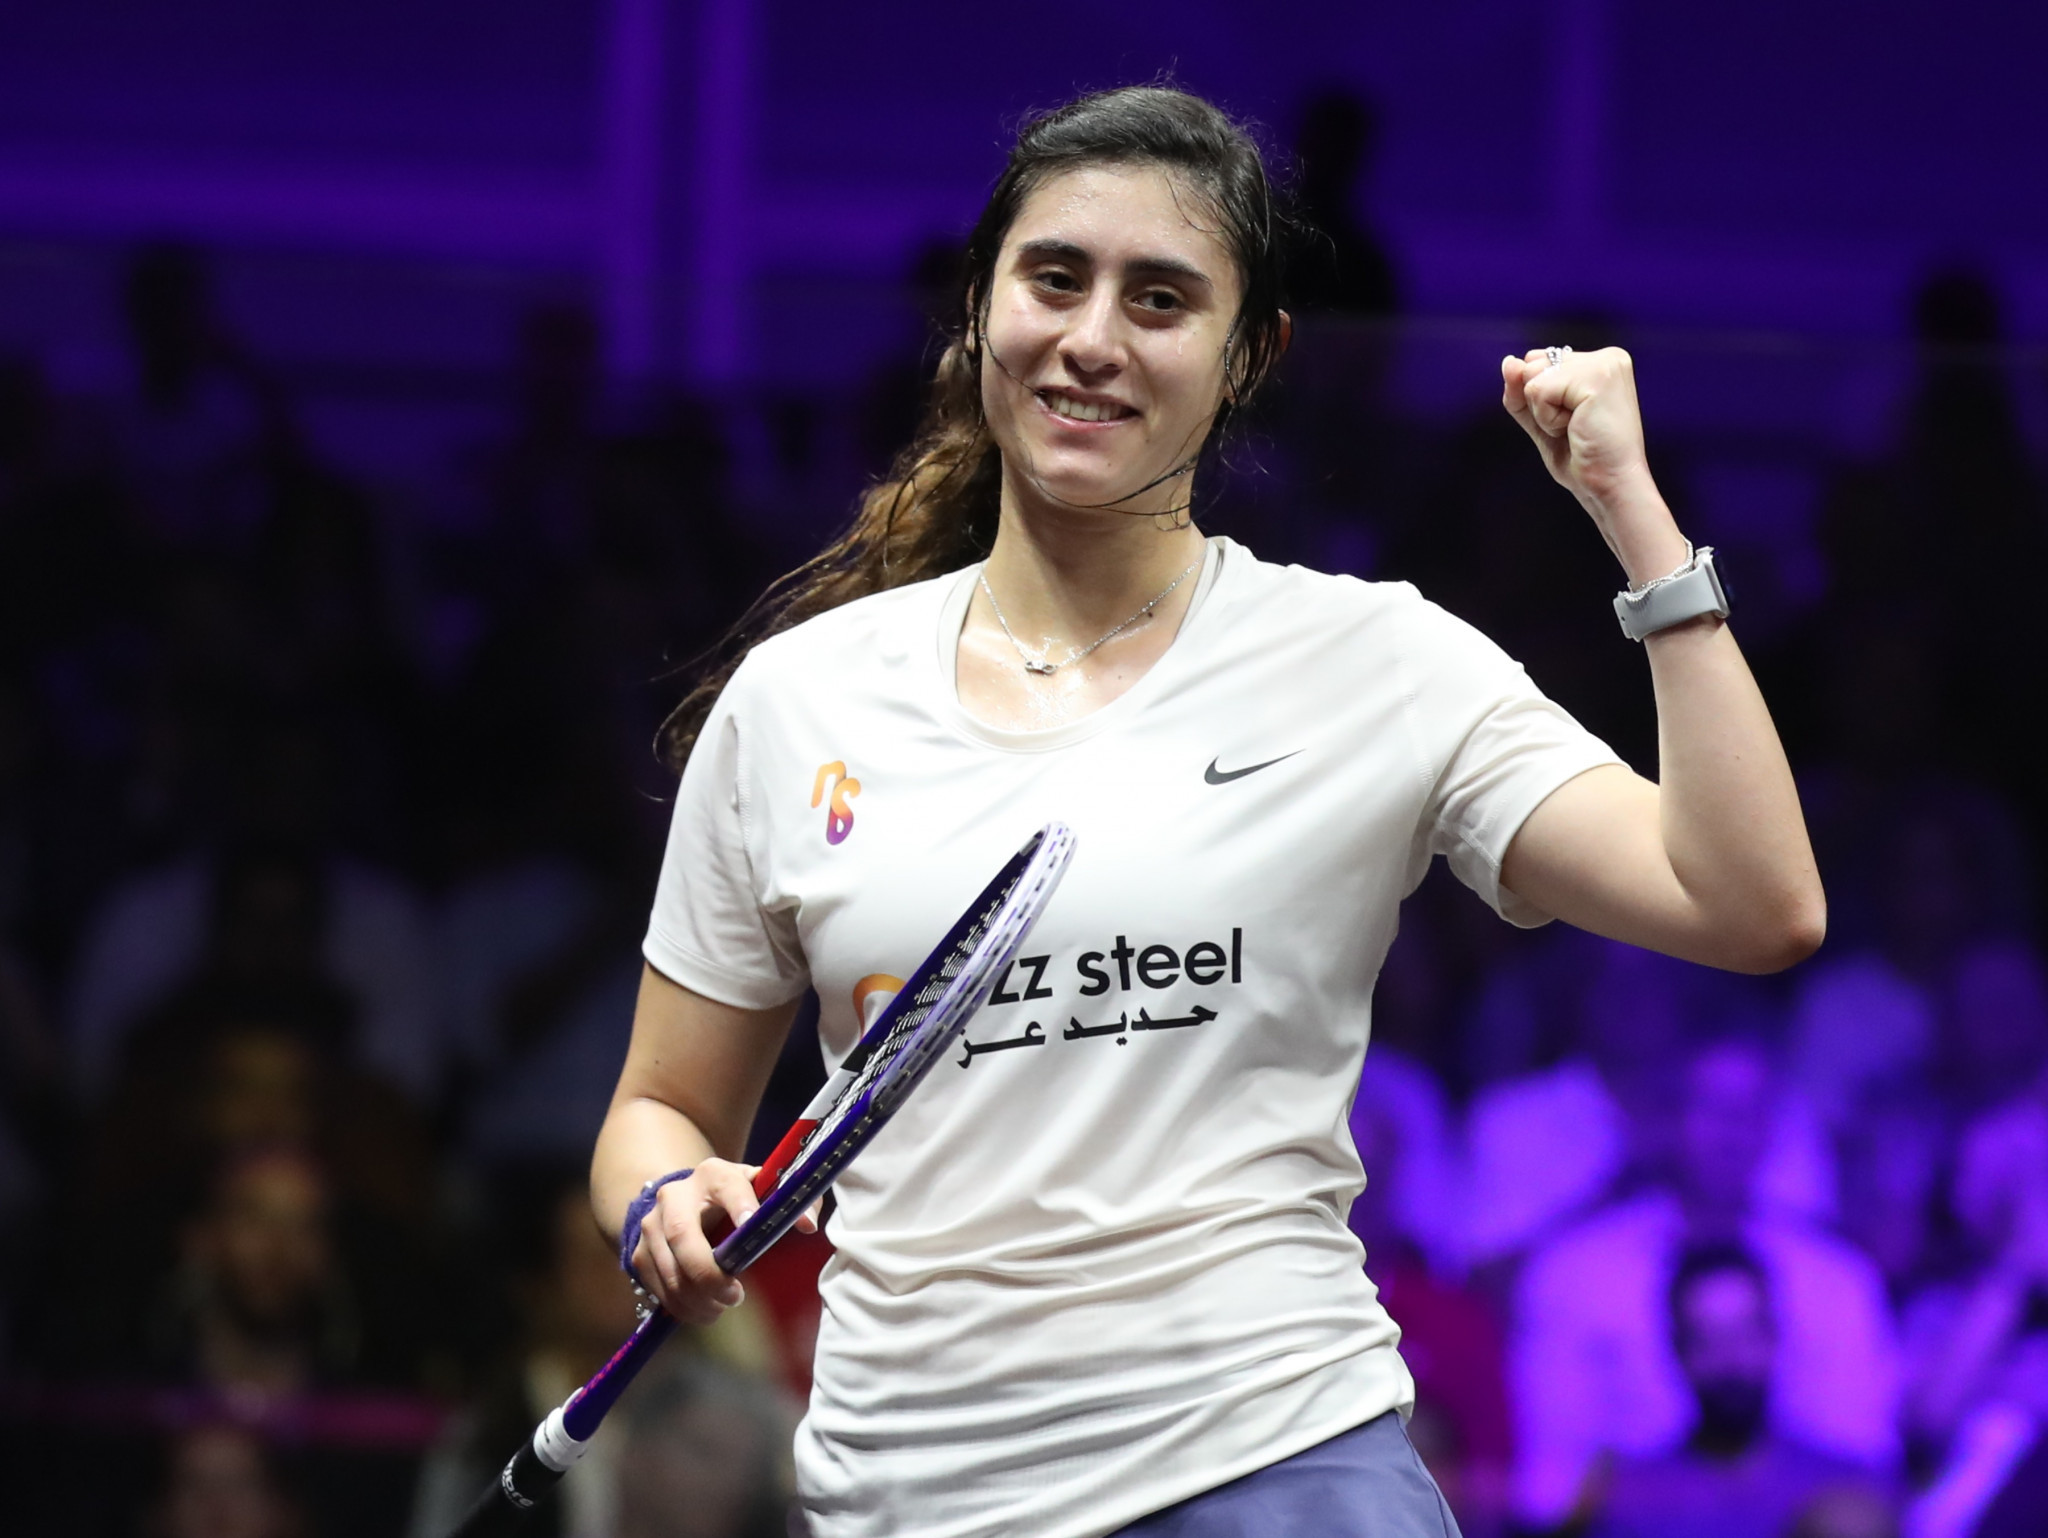 Nour El Sherbini has discovered her potential route to the World Championship final ©Getty Images